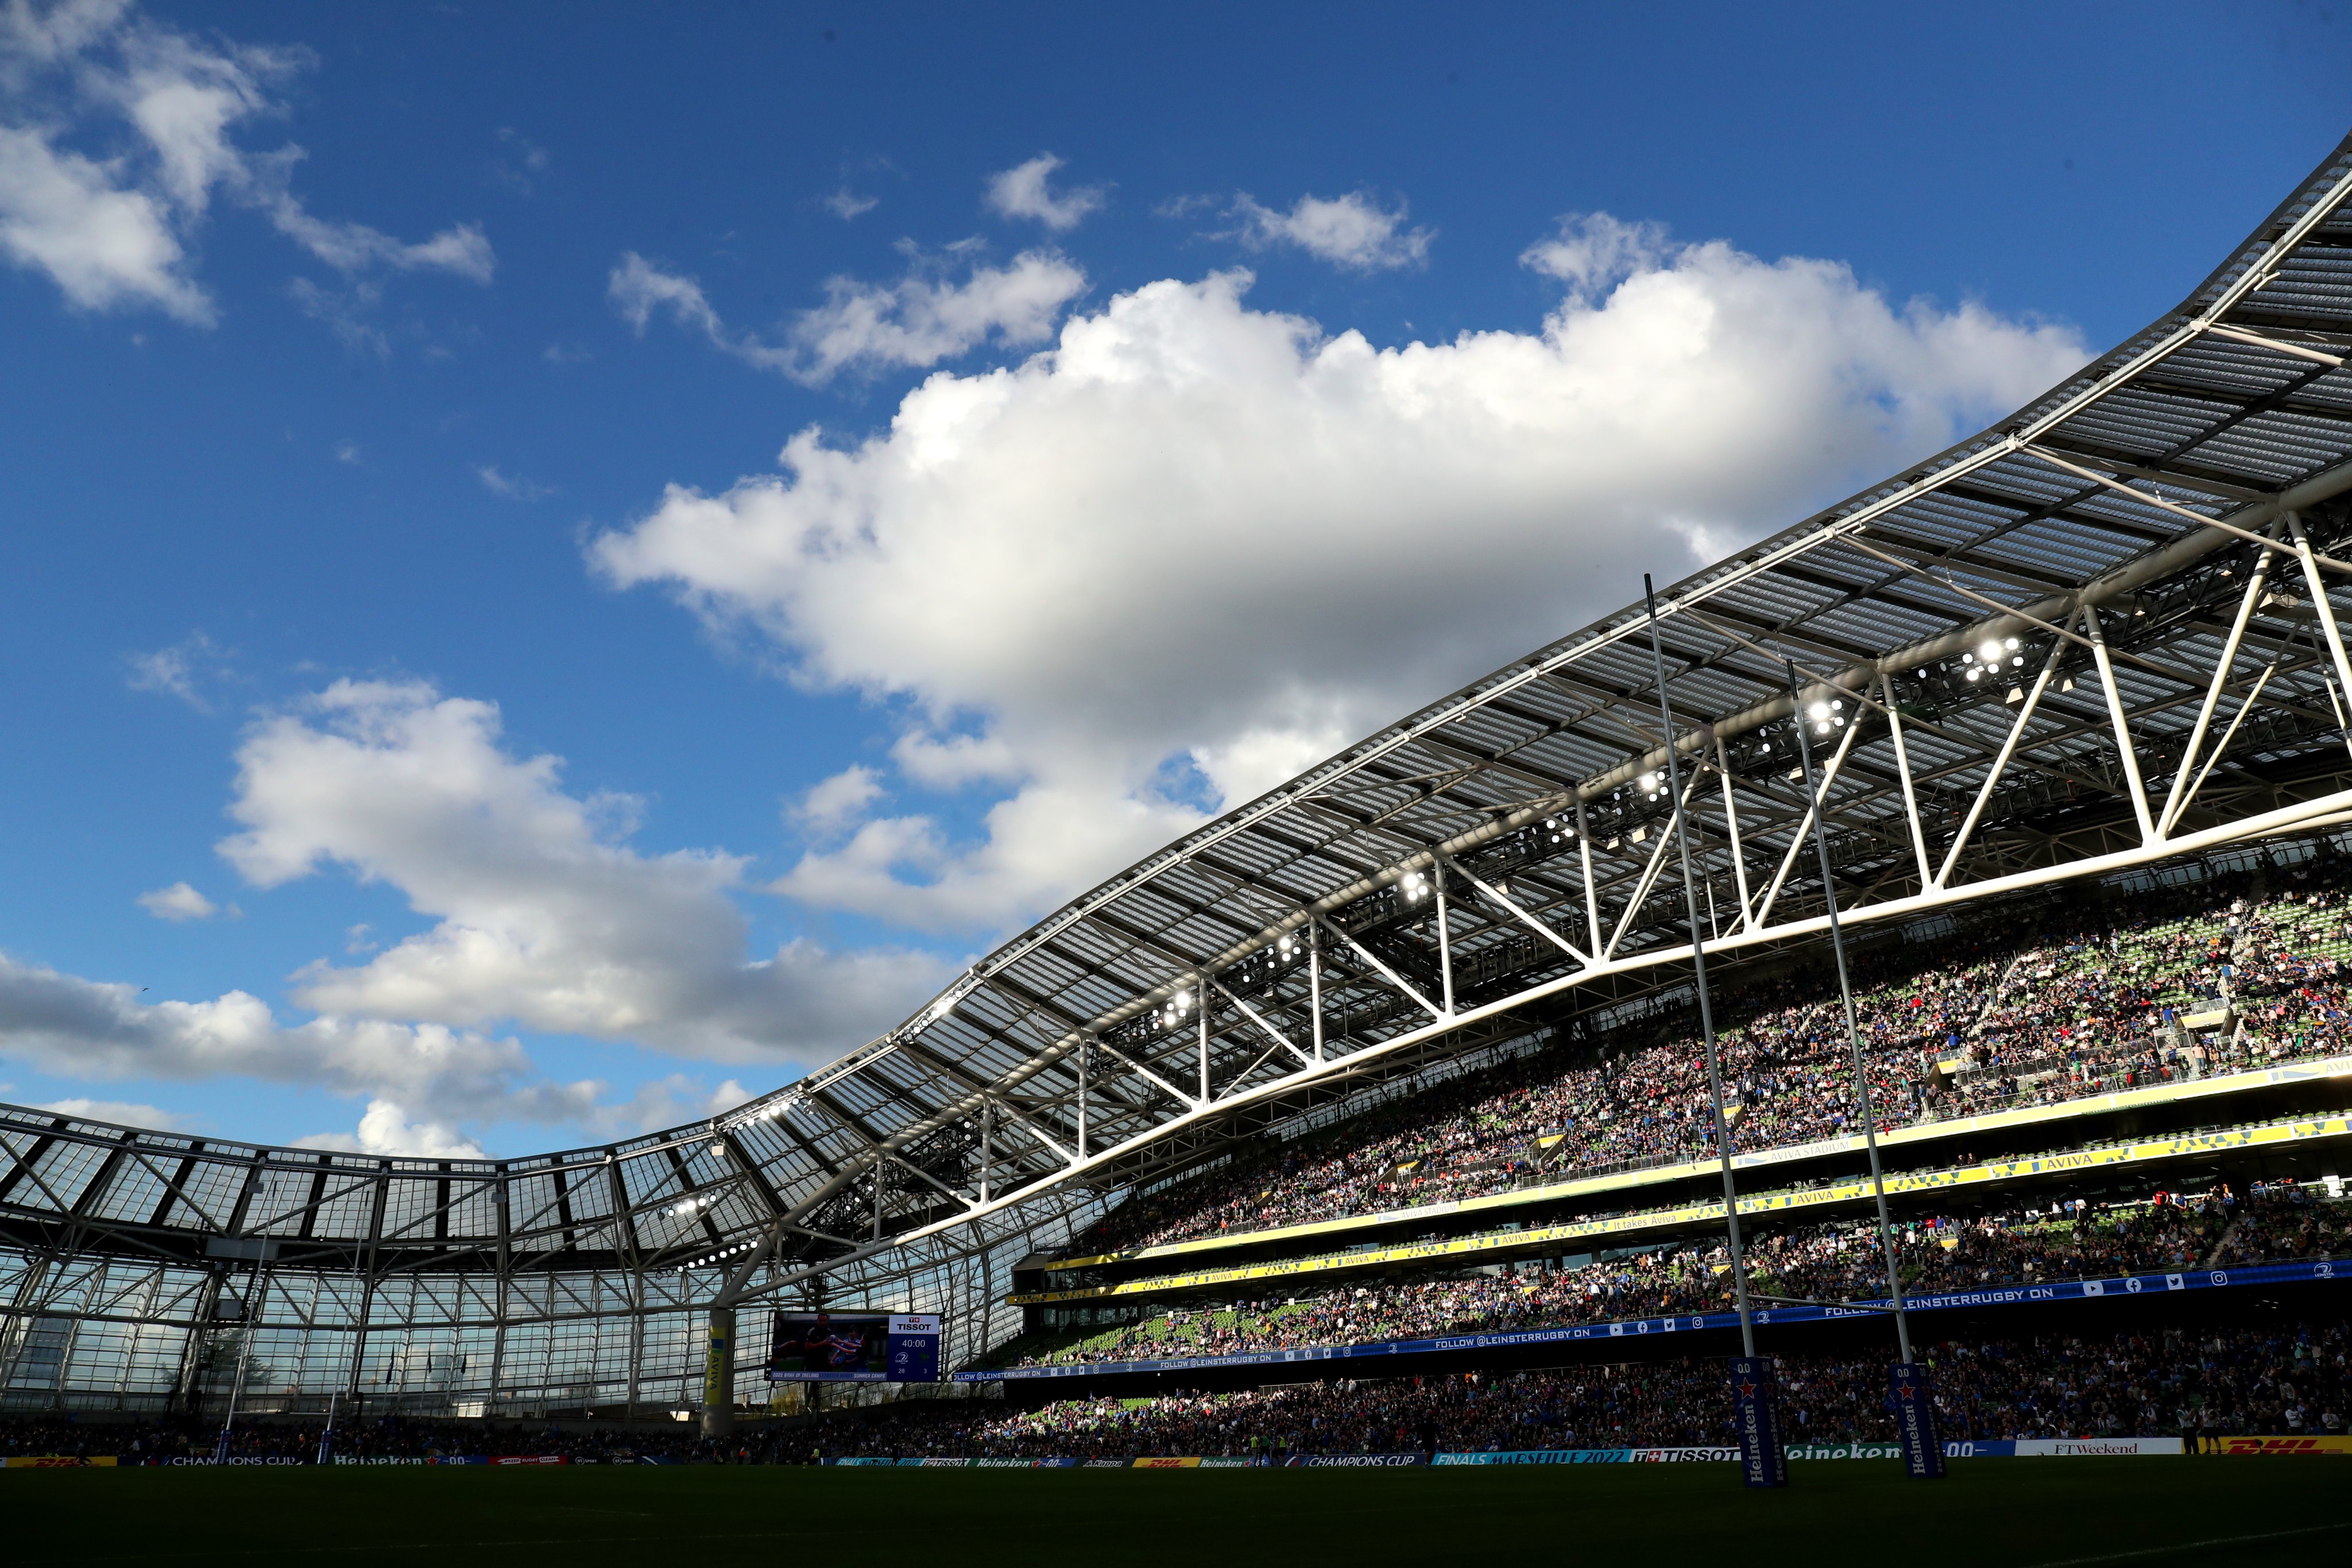 Rugby On Bt Sport Destination Dublin Aviva Stadium Will Host The 23 Heineken Champions Cup And Challenge Cup Finals The Matches Will Take Place In Ireland S Capital On Friday